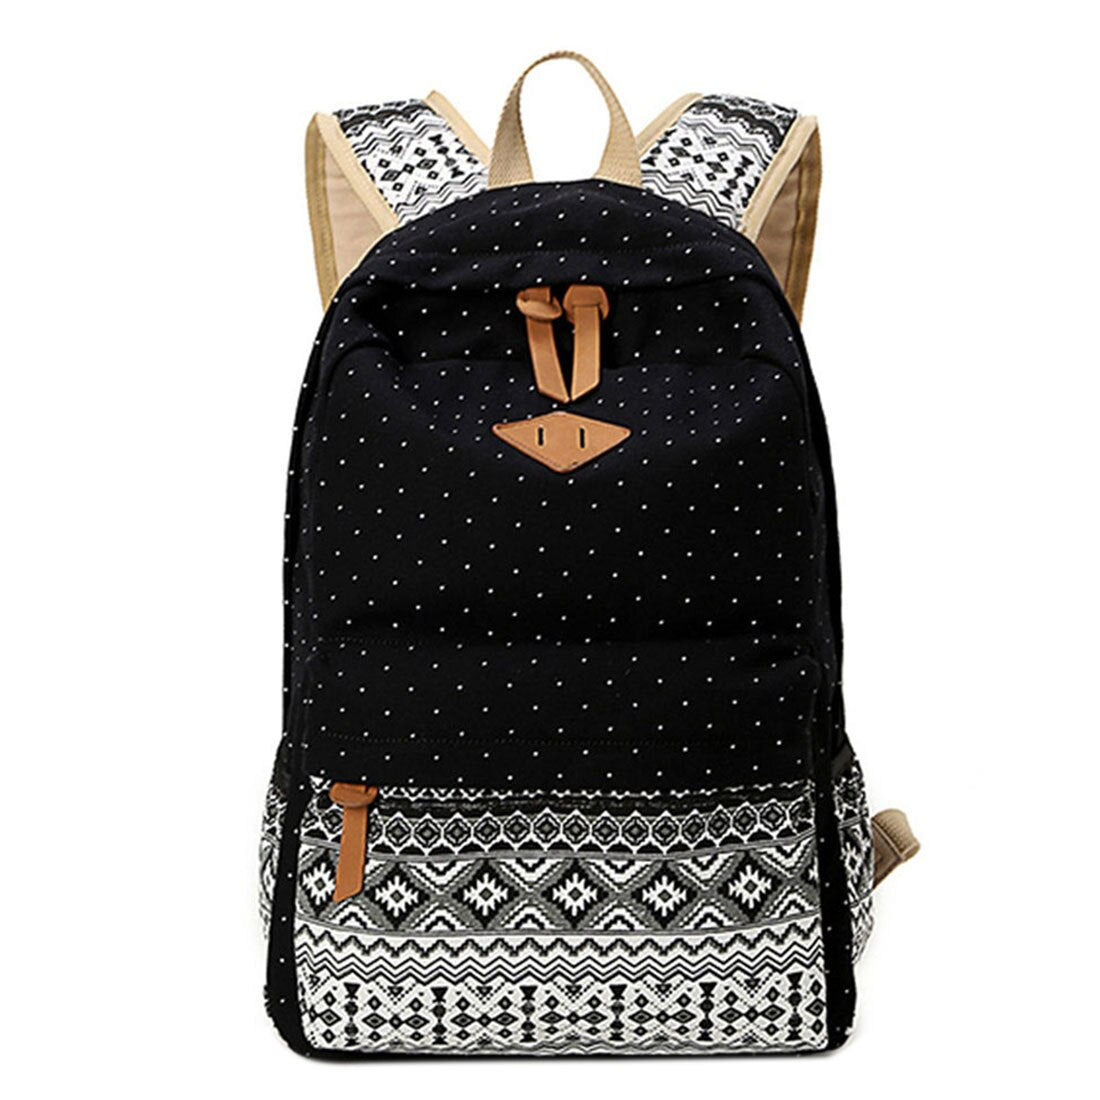 New Polka Dot Printing Women Backpack Cute Lightweight Canvas Bookbags Middle High School Bags for Teenage Girls - ebowsos